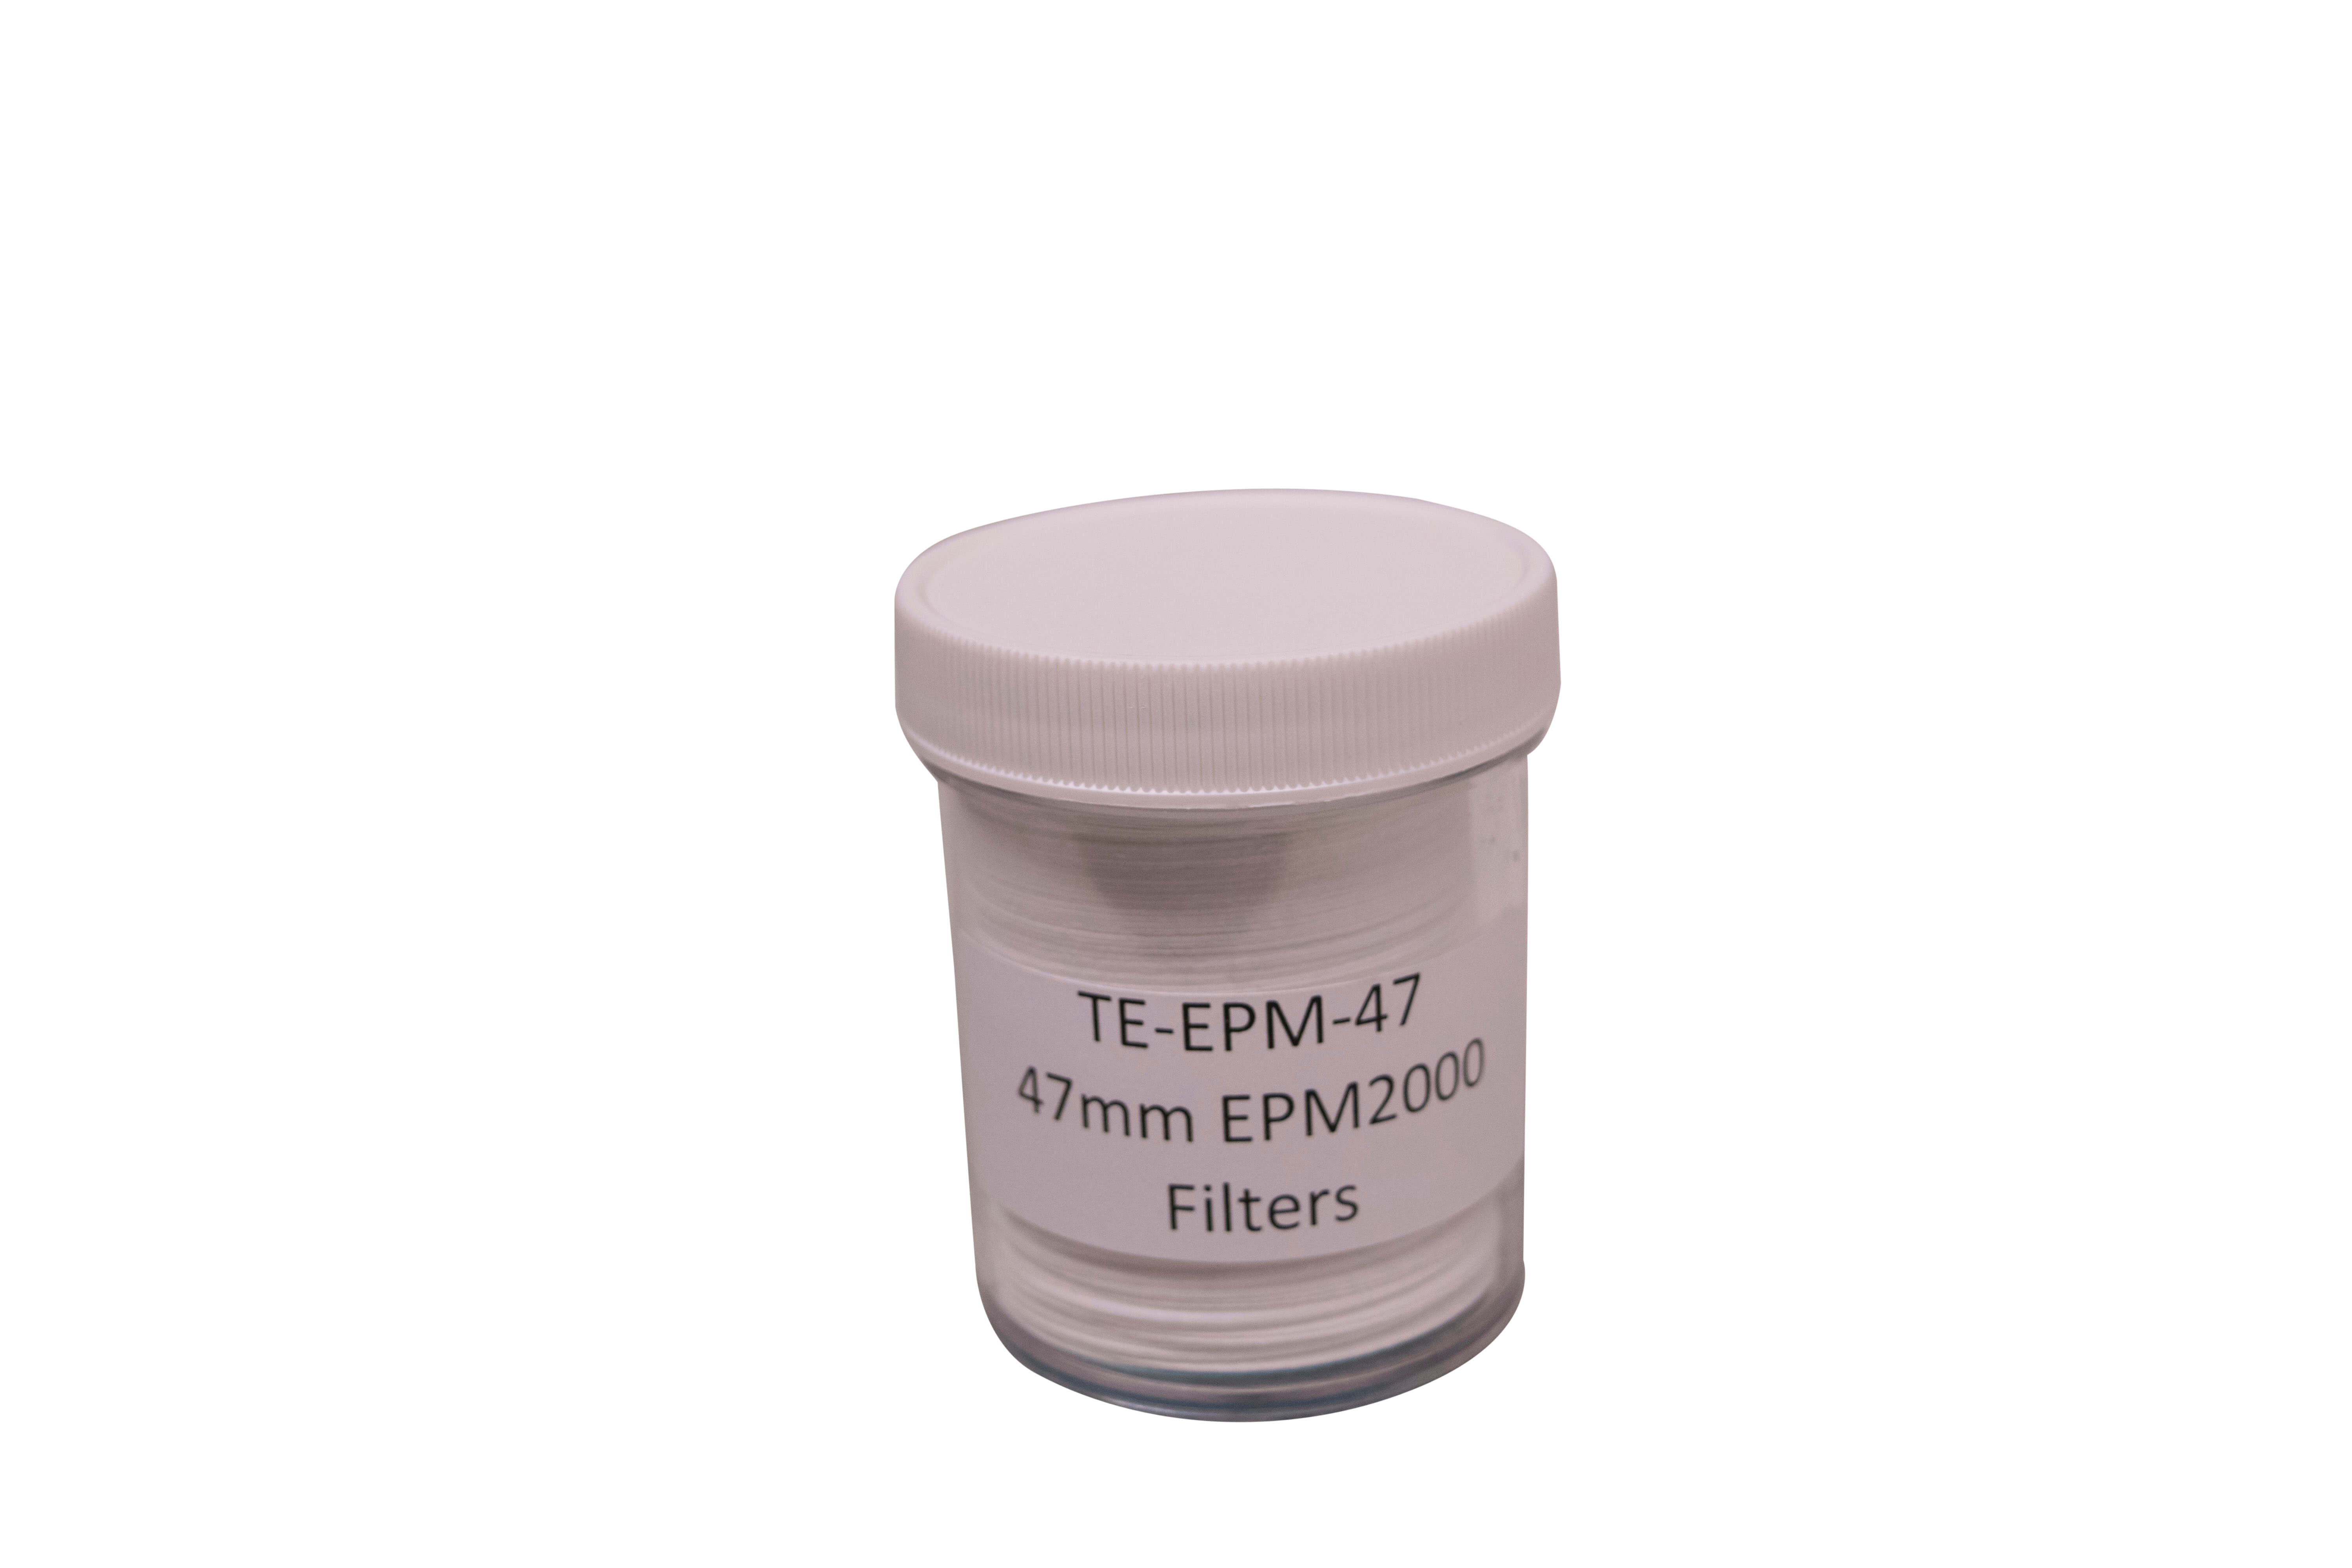 47mm EPM2000 Filters